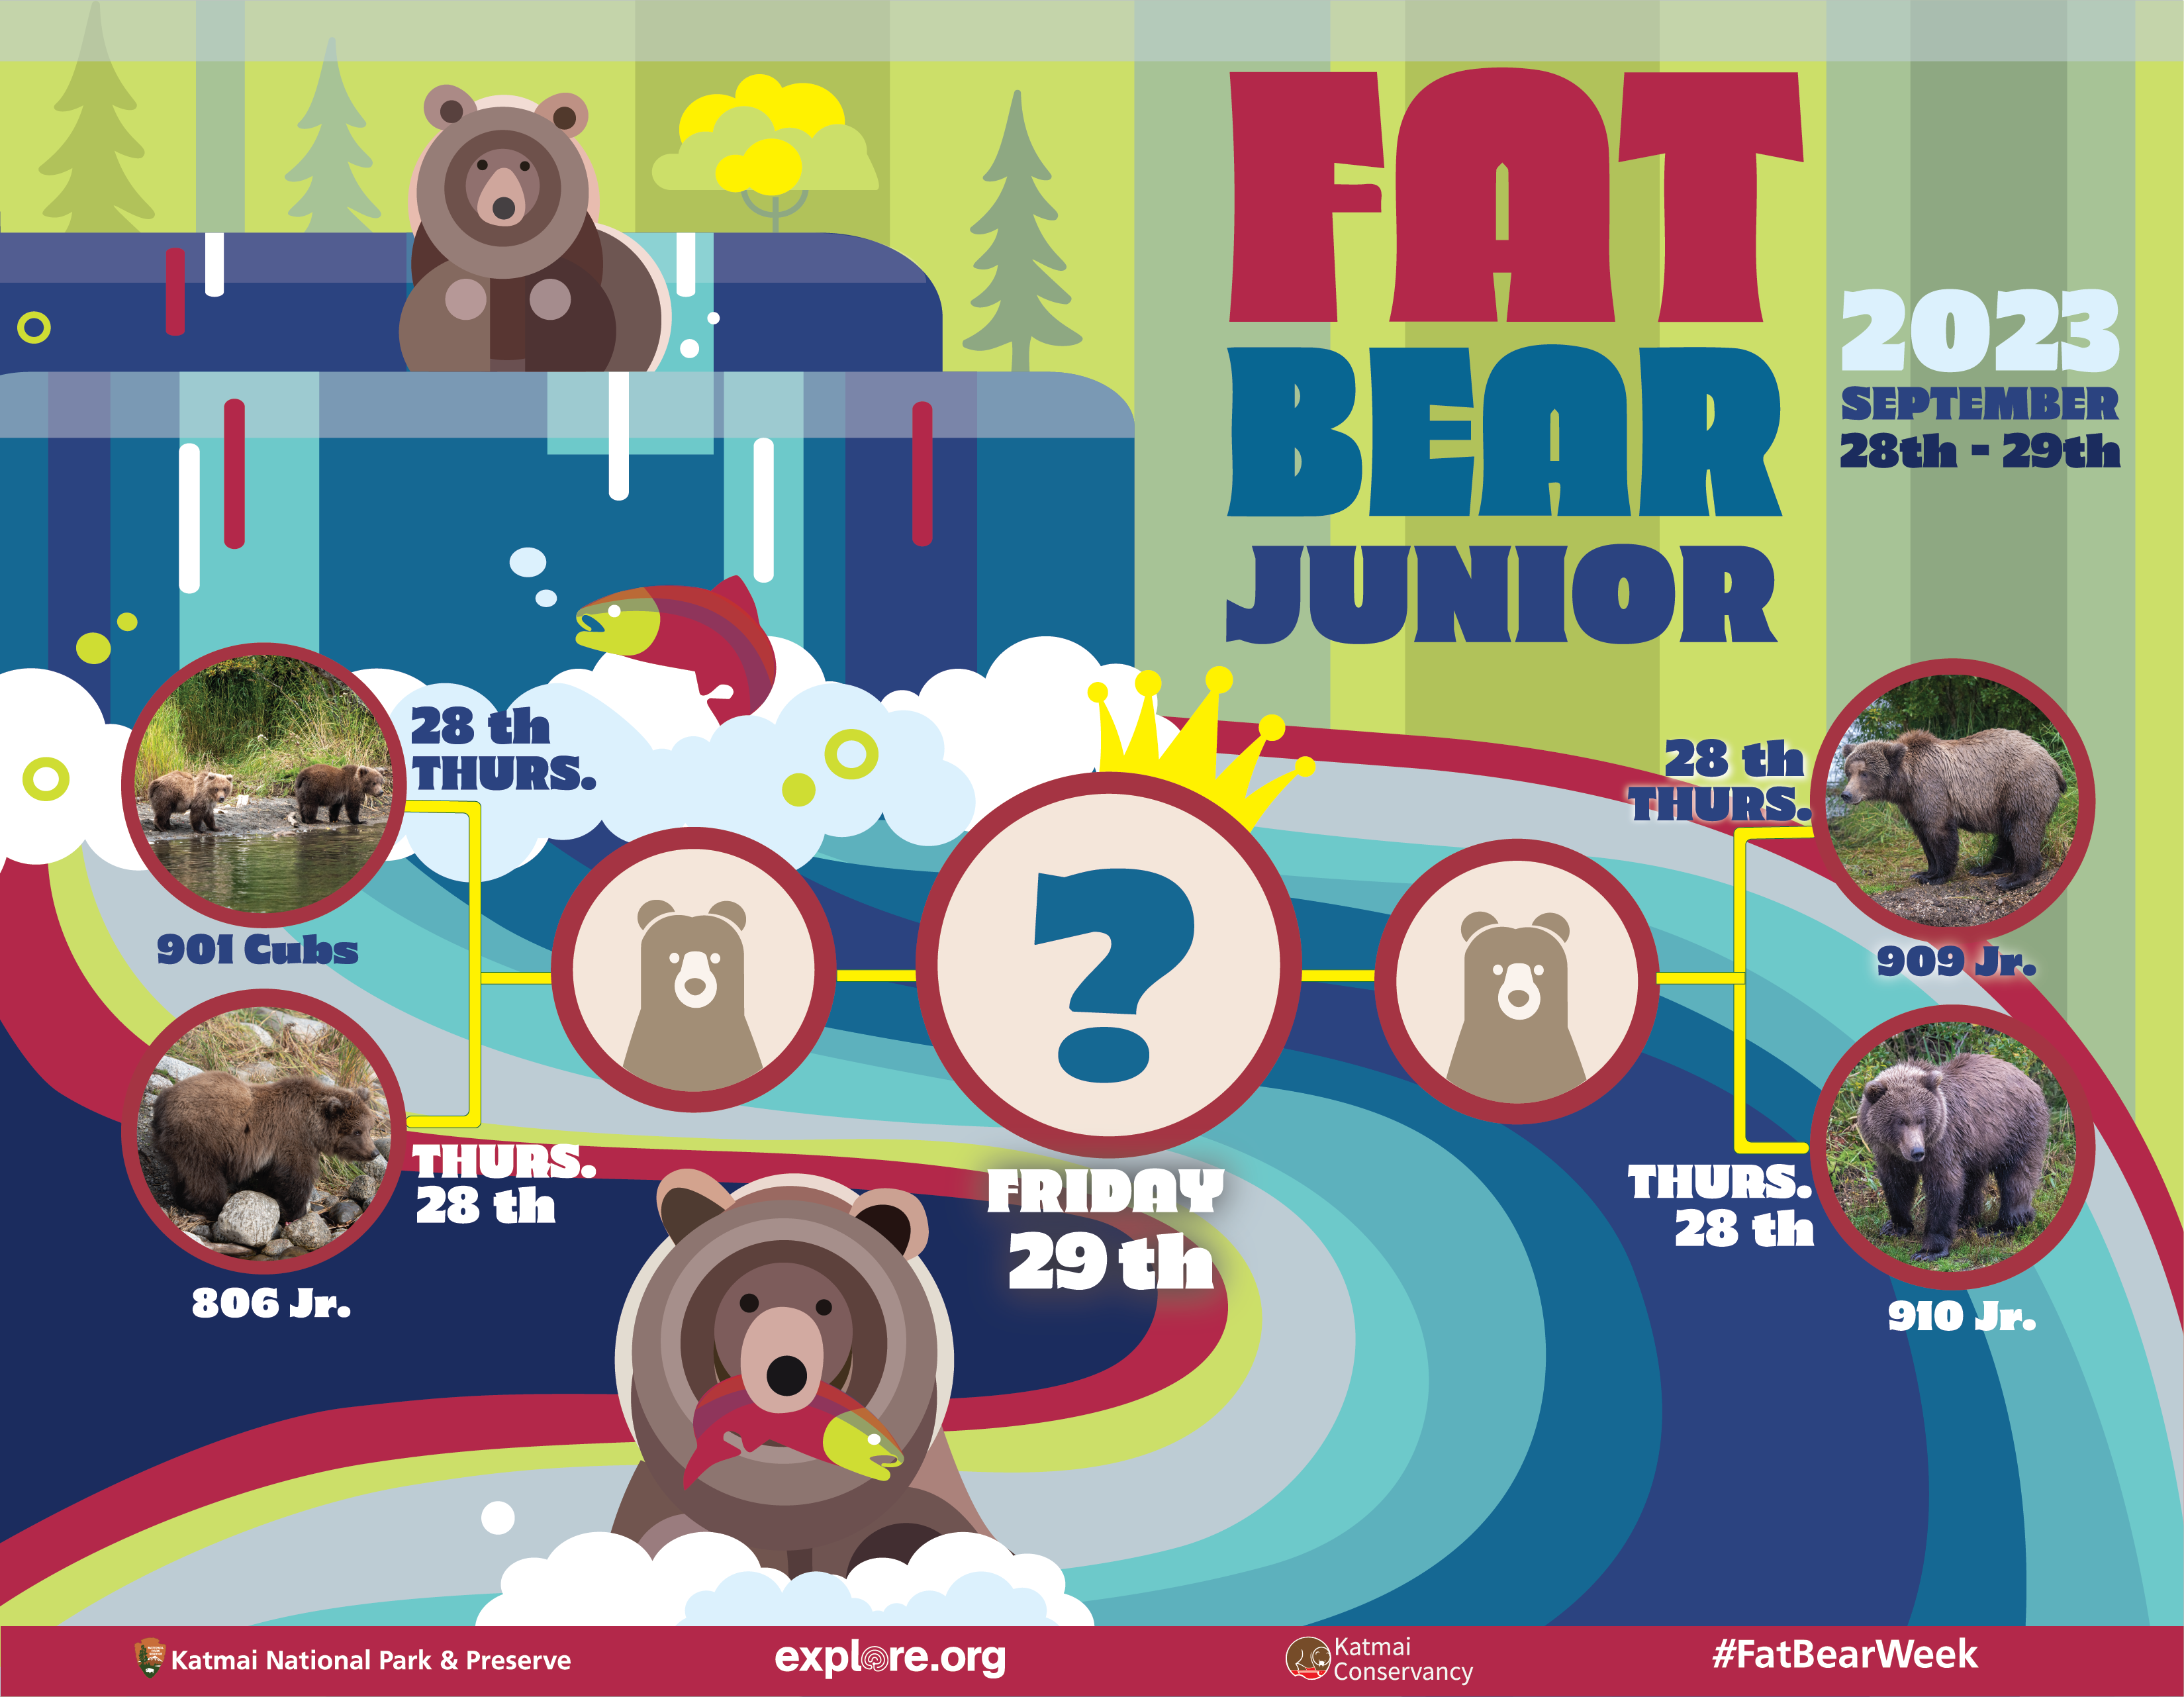 Fat-Bear-Junior-2023-UPDATED-WITH-PICS_1.png